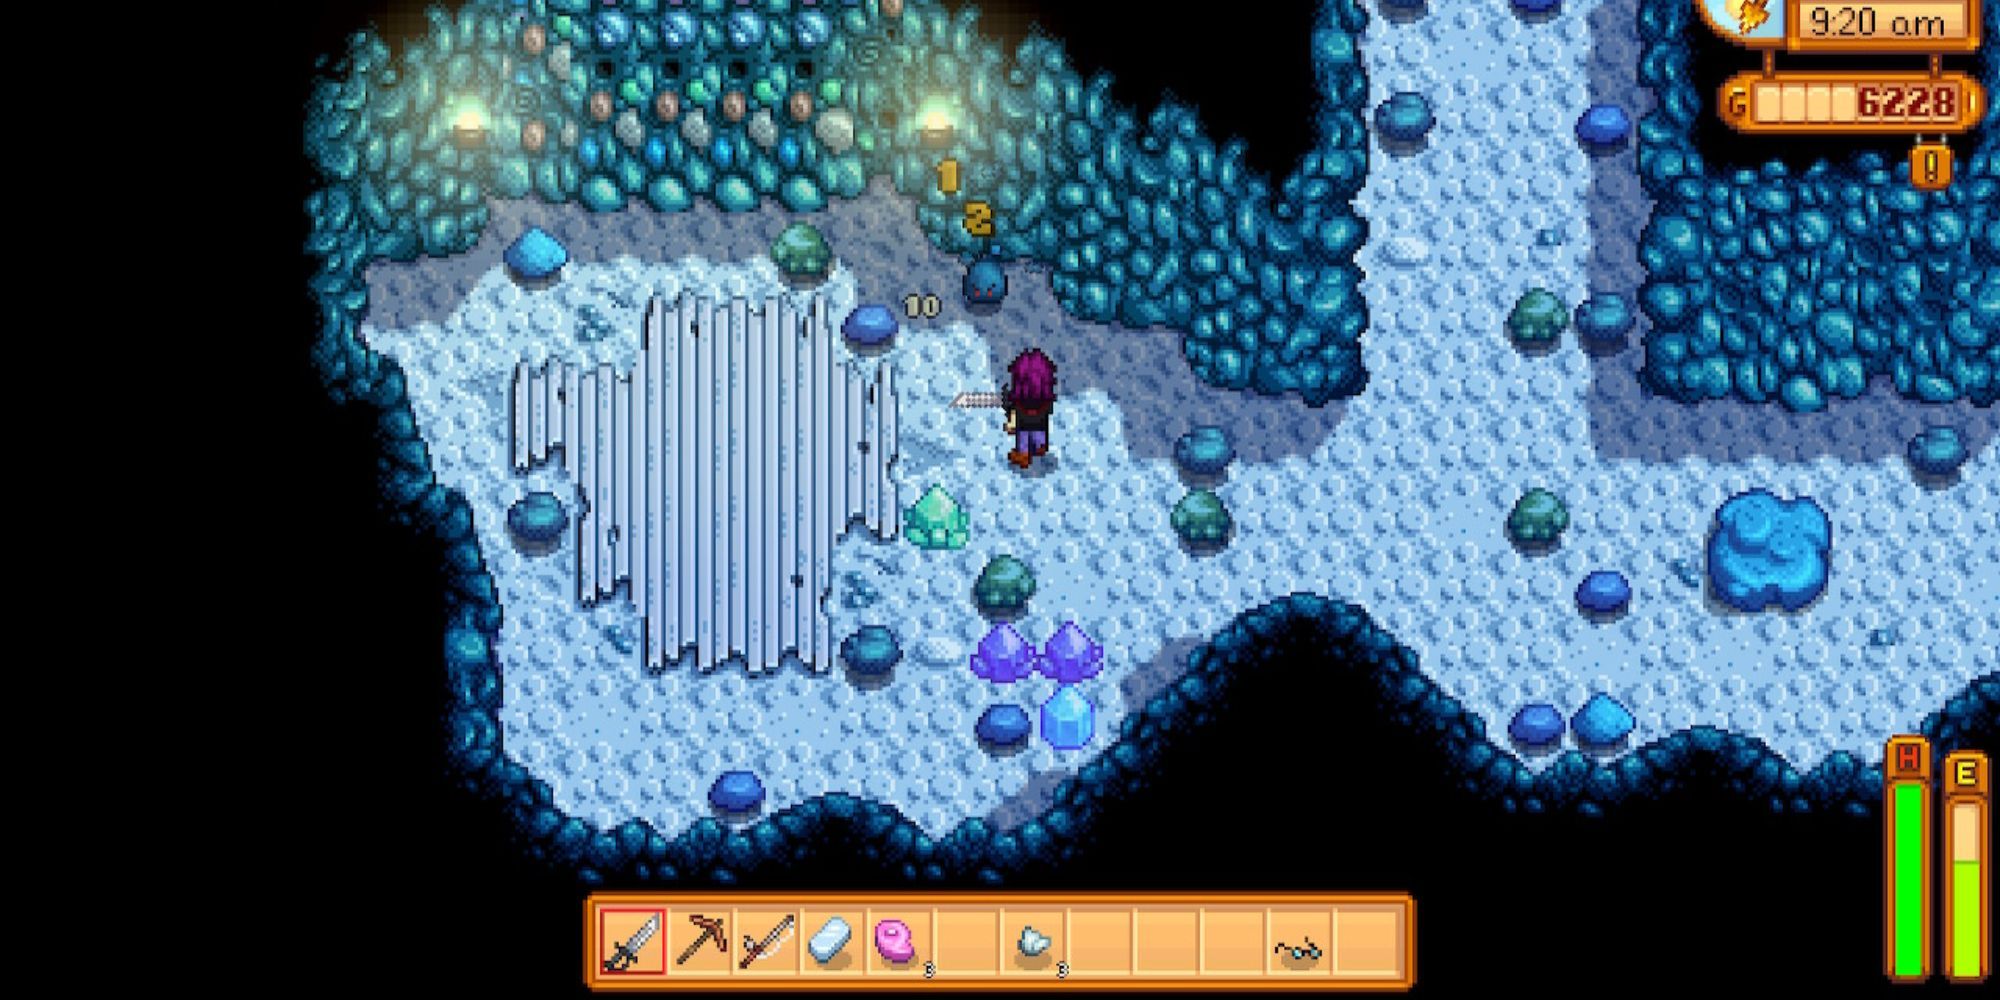 Fighting a slime in The Mine in Stardew Valley